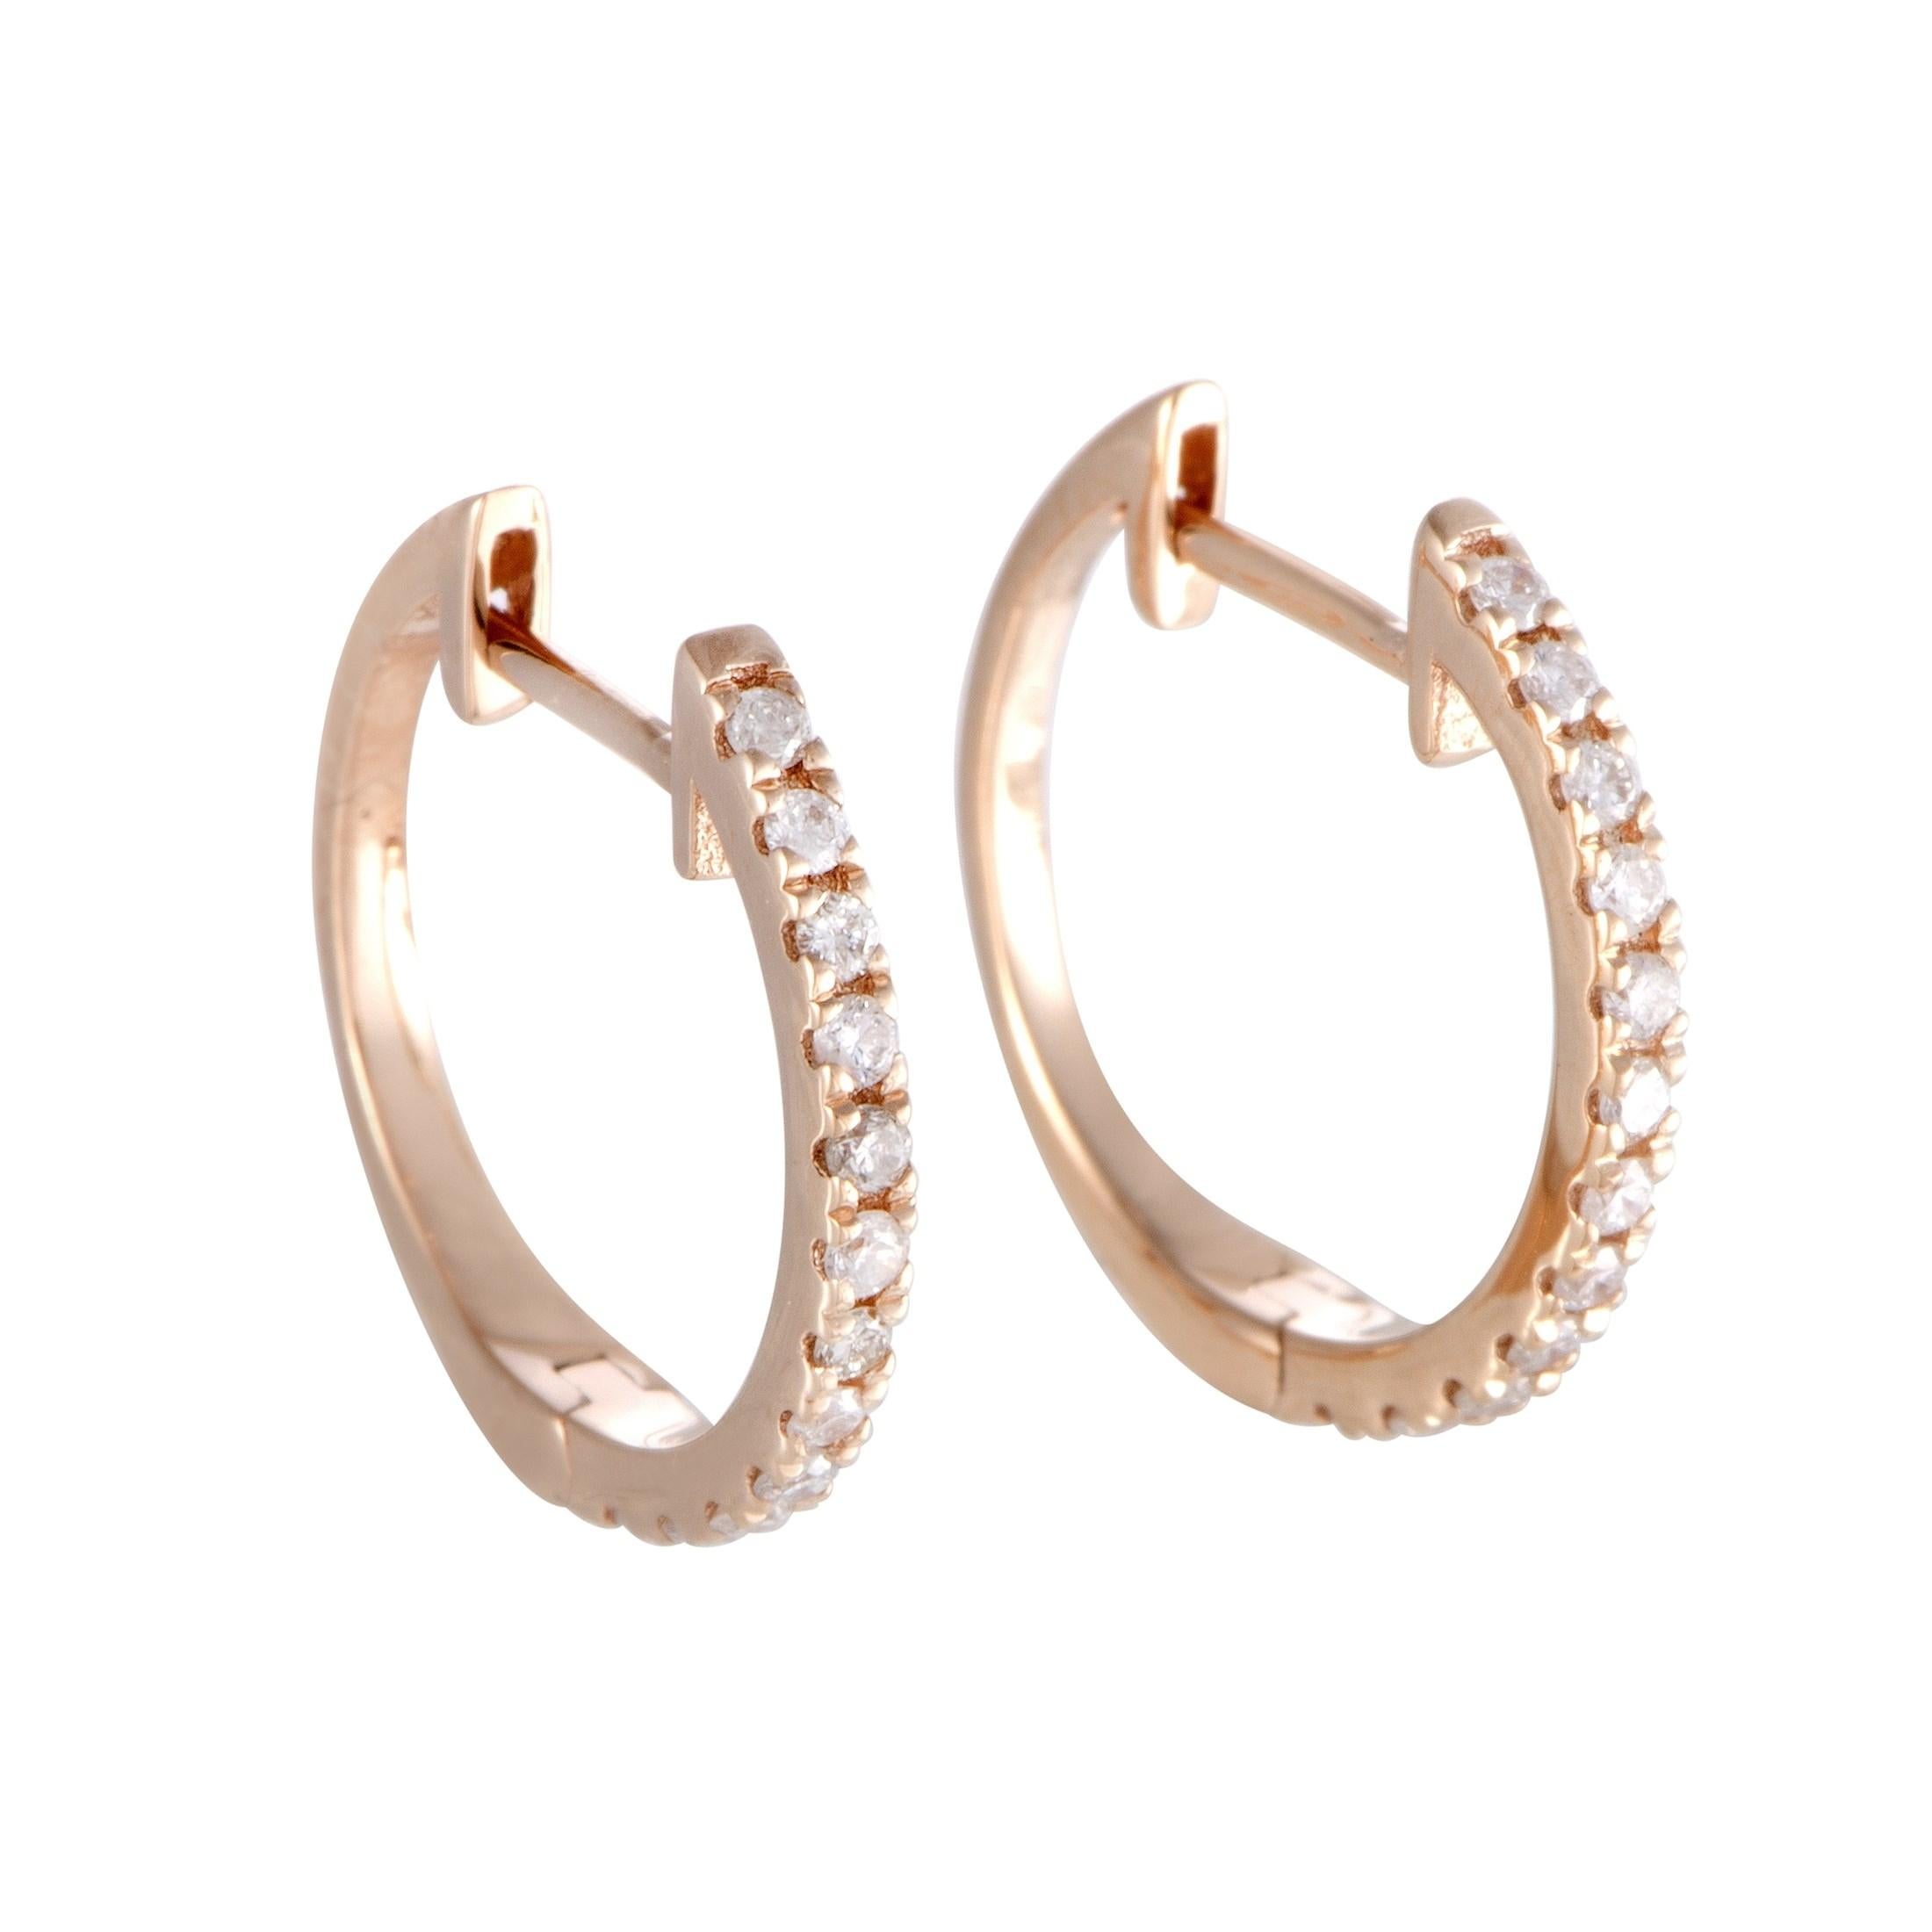 This stylish set of earrings is made of exemplary 14K rose gold and embellished with 0.22 ct of brilliant-cut diamonds. Each earring weighs 0.60 gram.